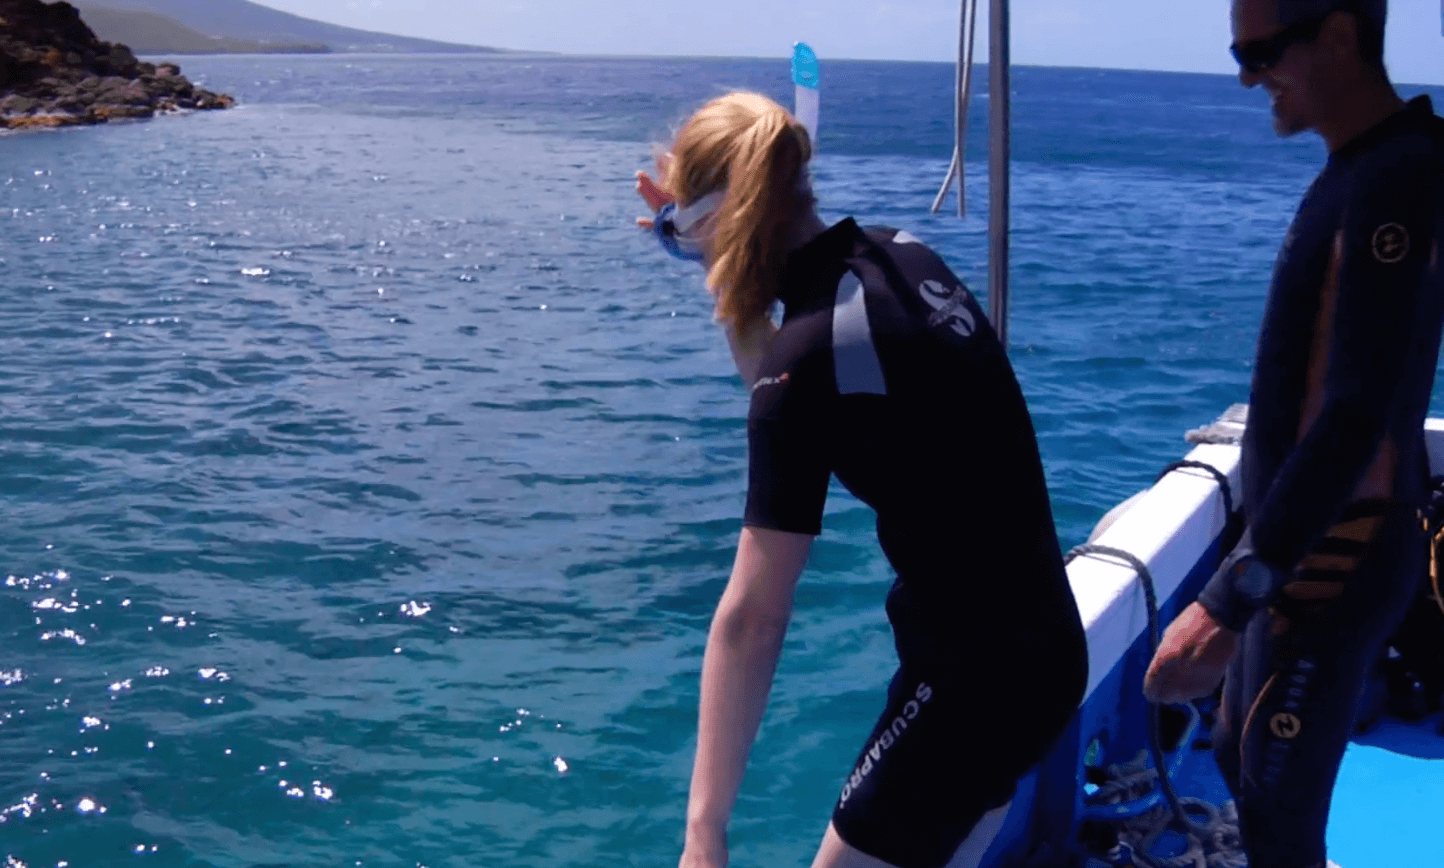 Caribbean Snorkeling in the Jacques Cousteau Reserve